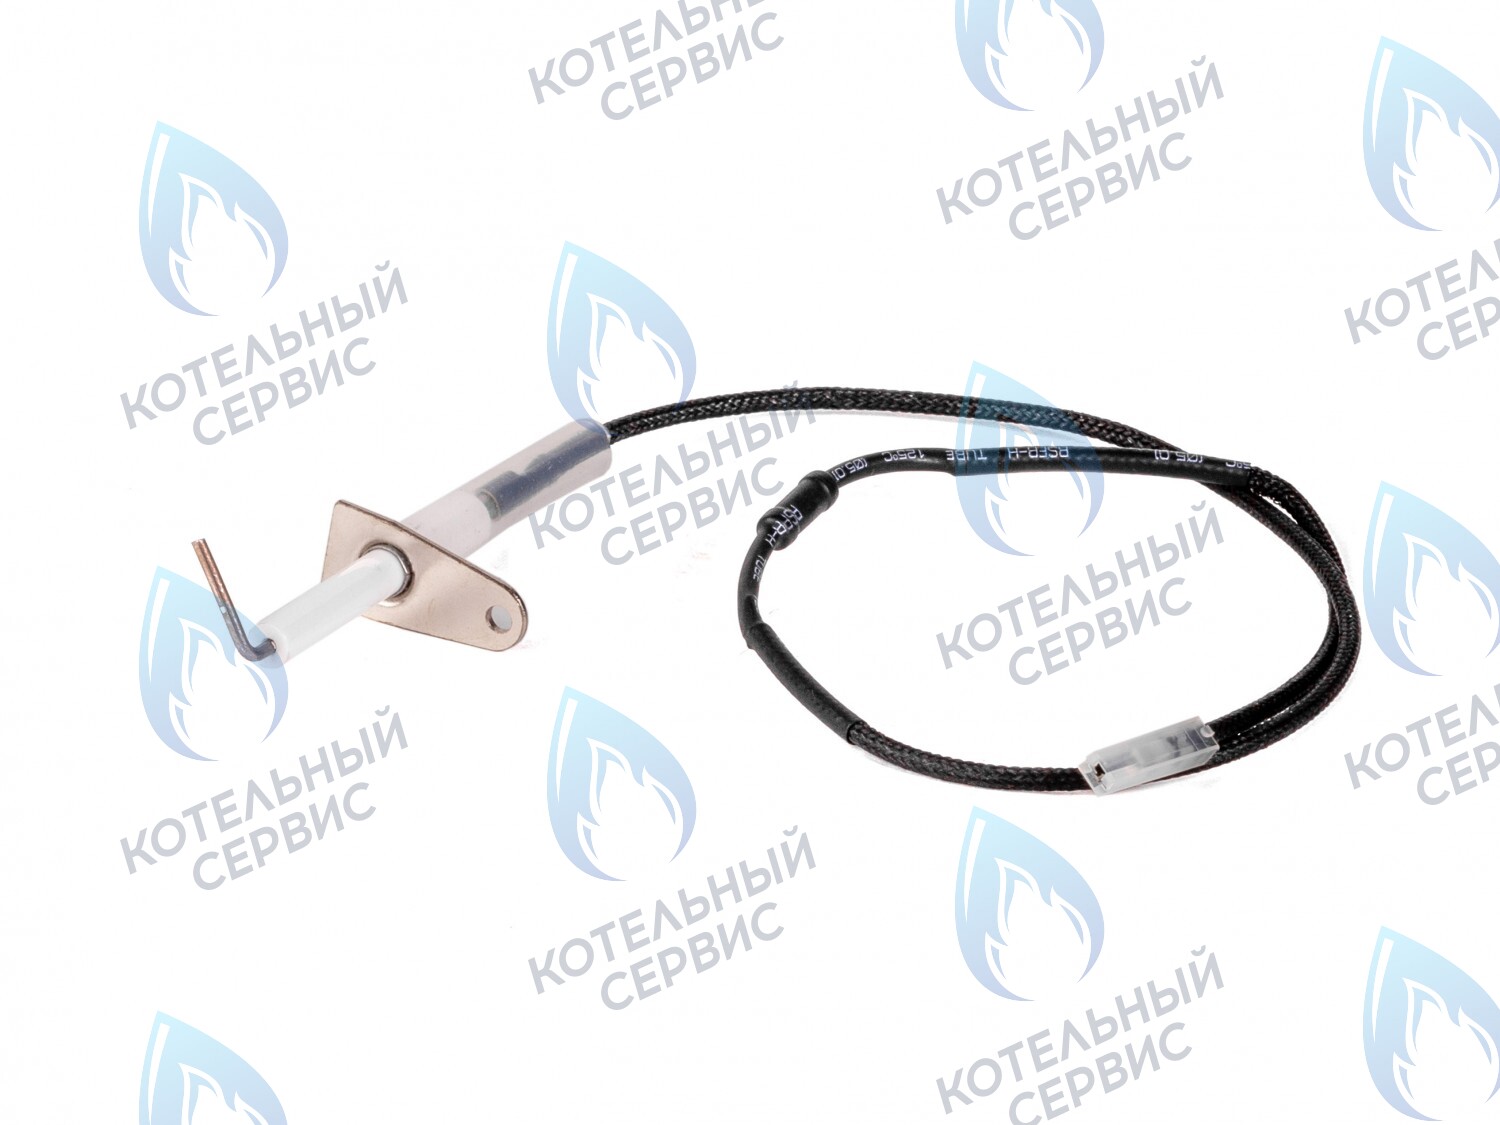 IE010 Электрод розжига и ионизации HAIER F21S(T), F21(T) (F01101, 0530002946), L1P18-F21(M)HEC (F01305, 0530016114) в Барнауле